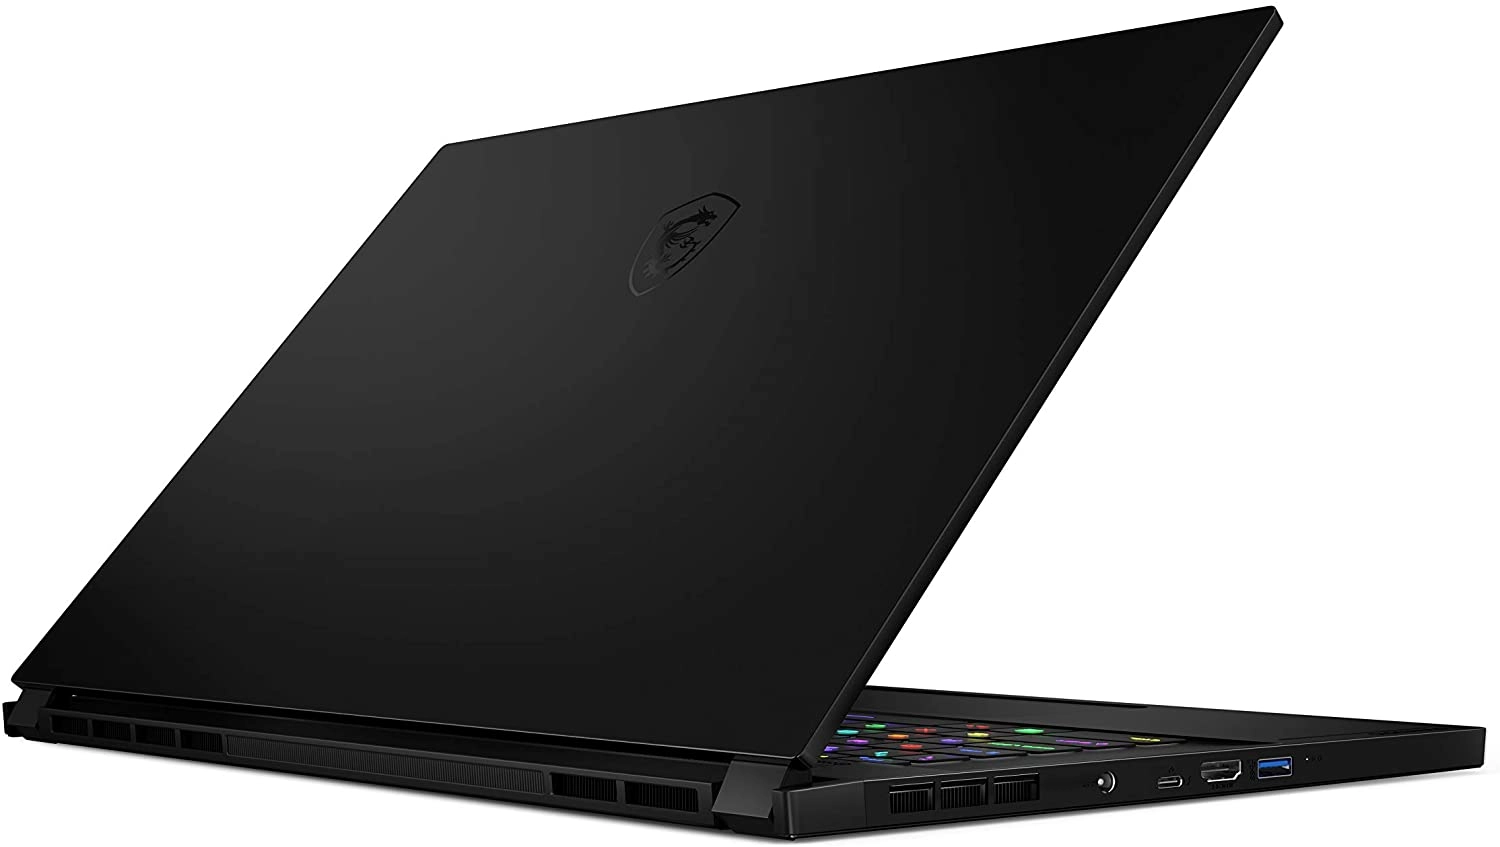 MSI GS66 Stealth 10SFS-440 laptop image